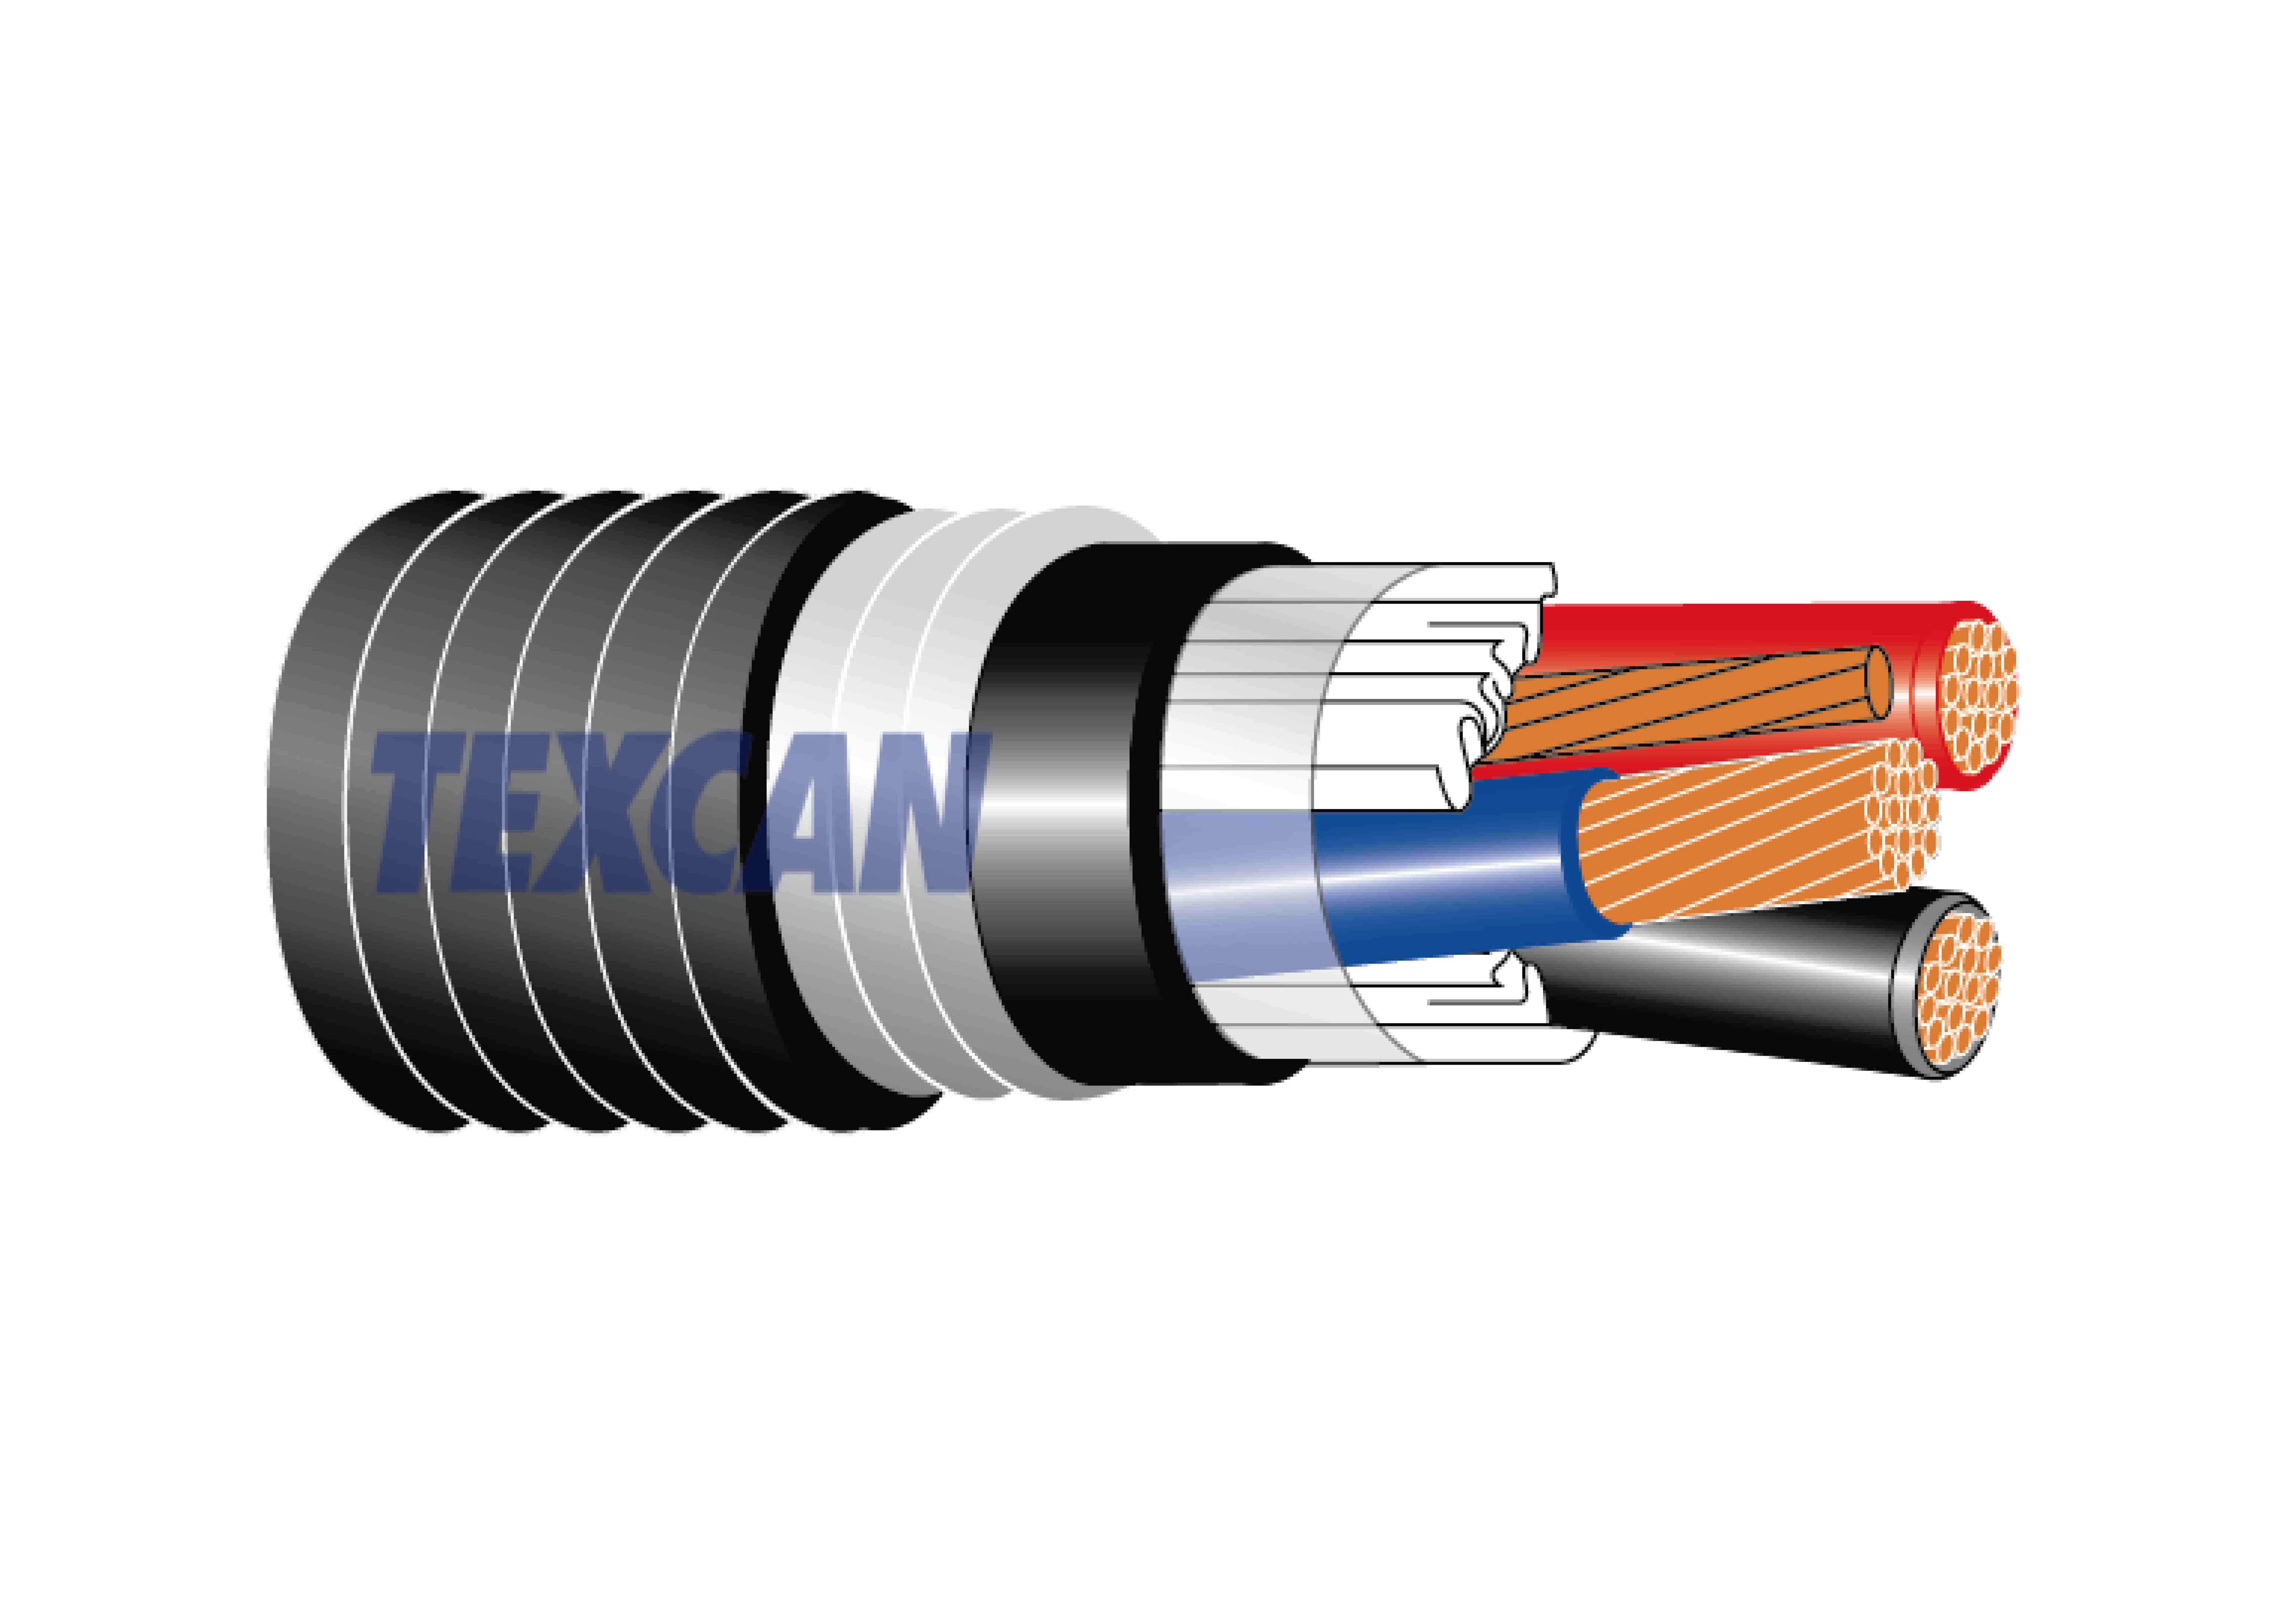 Texcan - Landing Pages - Southwire - Teck Cables.jpg